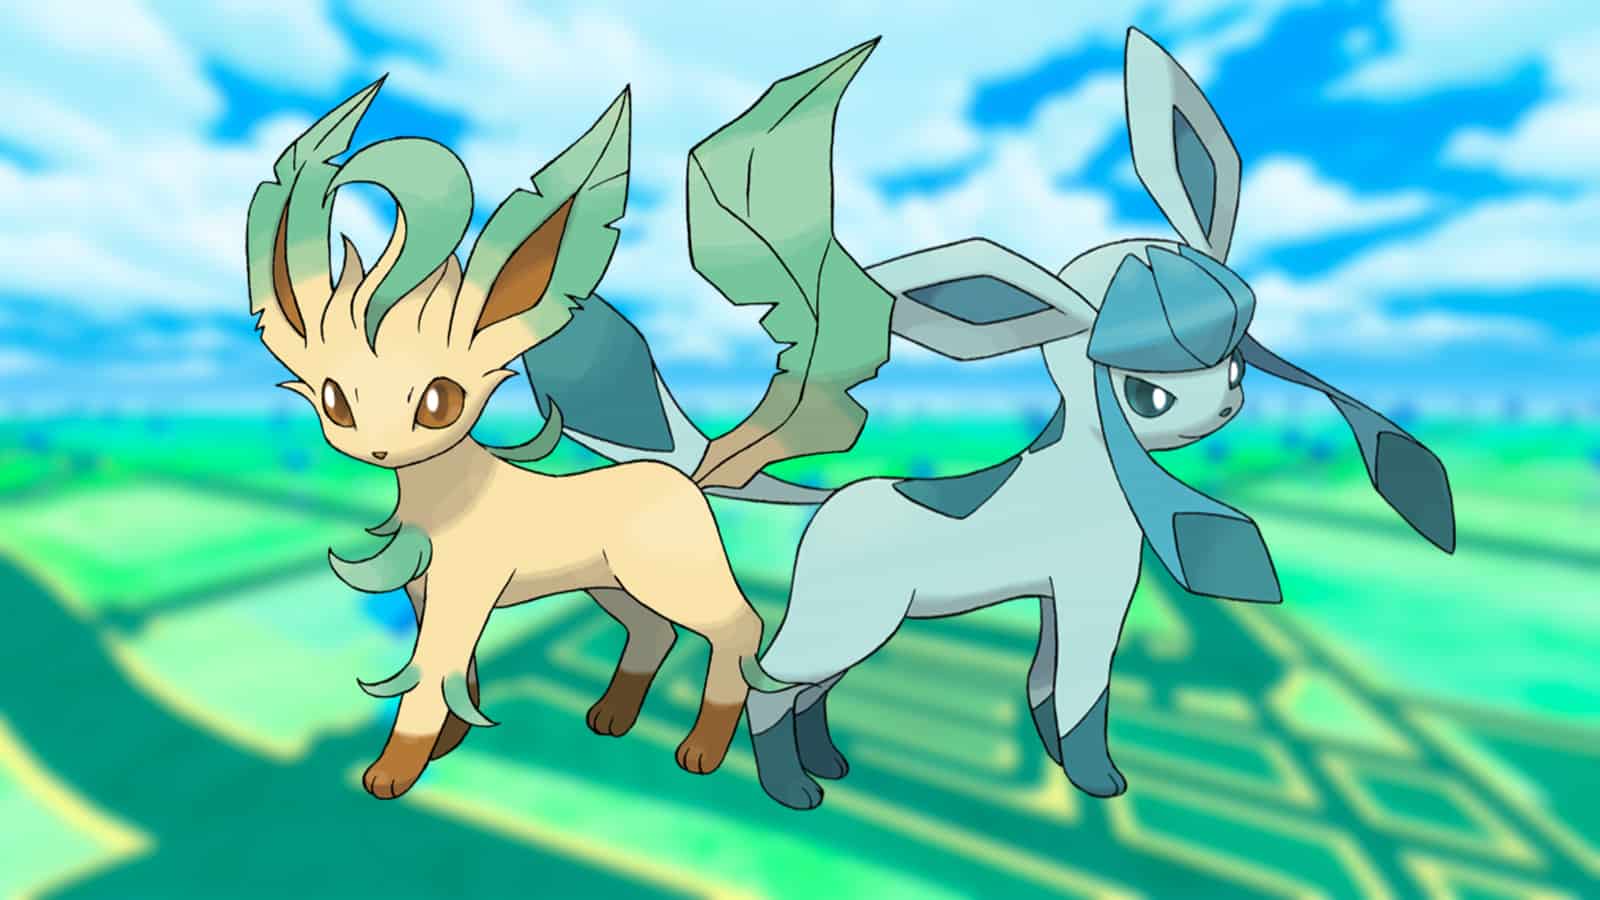 Leafeon and Glaceon in Pokemon Go.